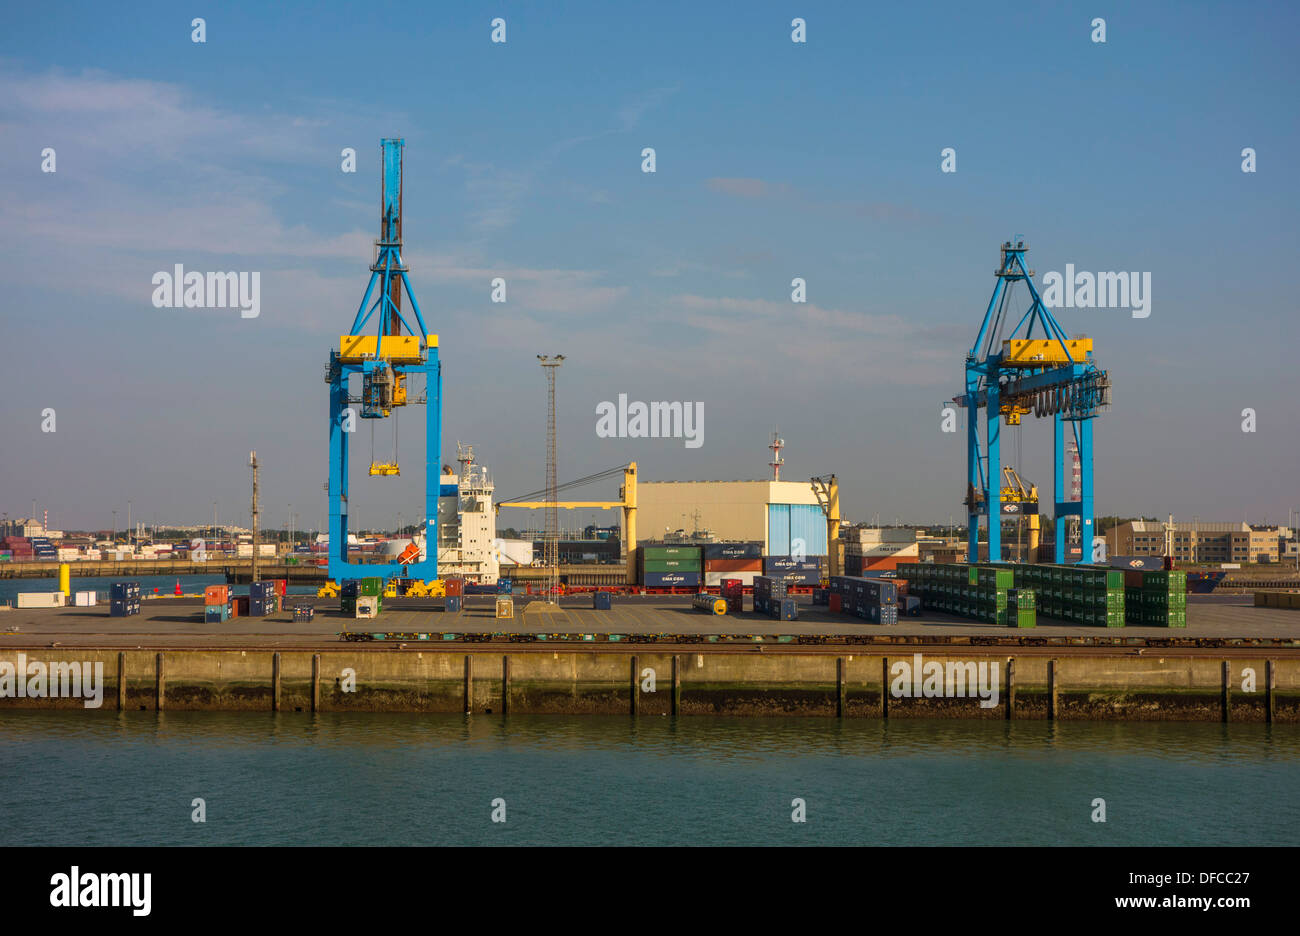 Zeebrugge port and container terminal, commerce, with ships, cranes and containers Stock Photo